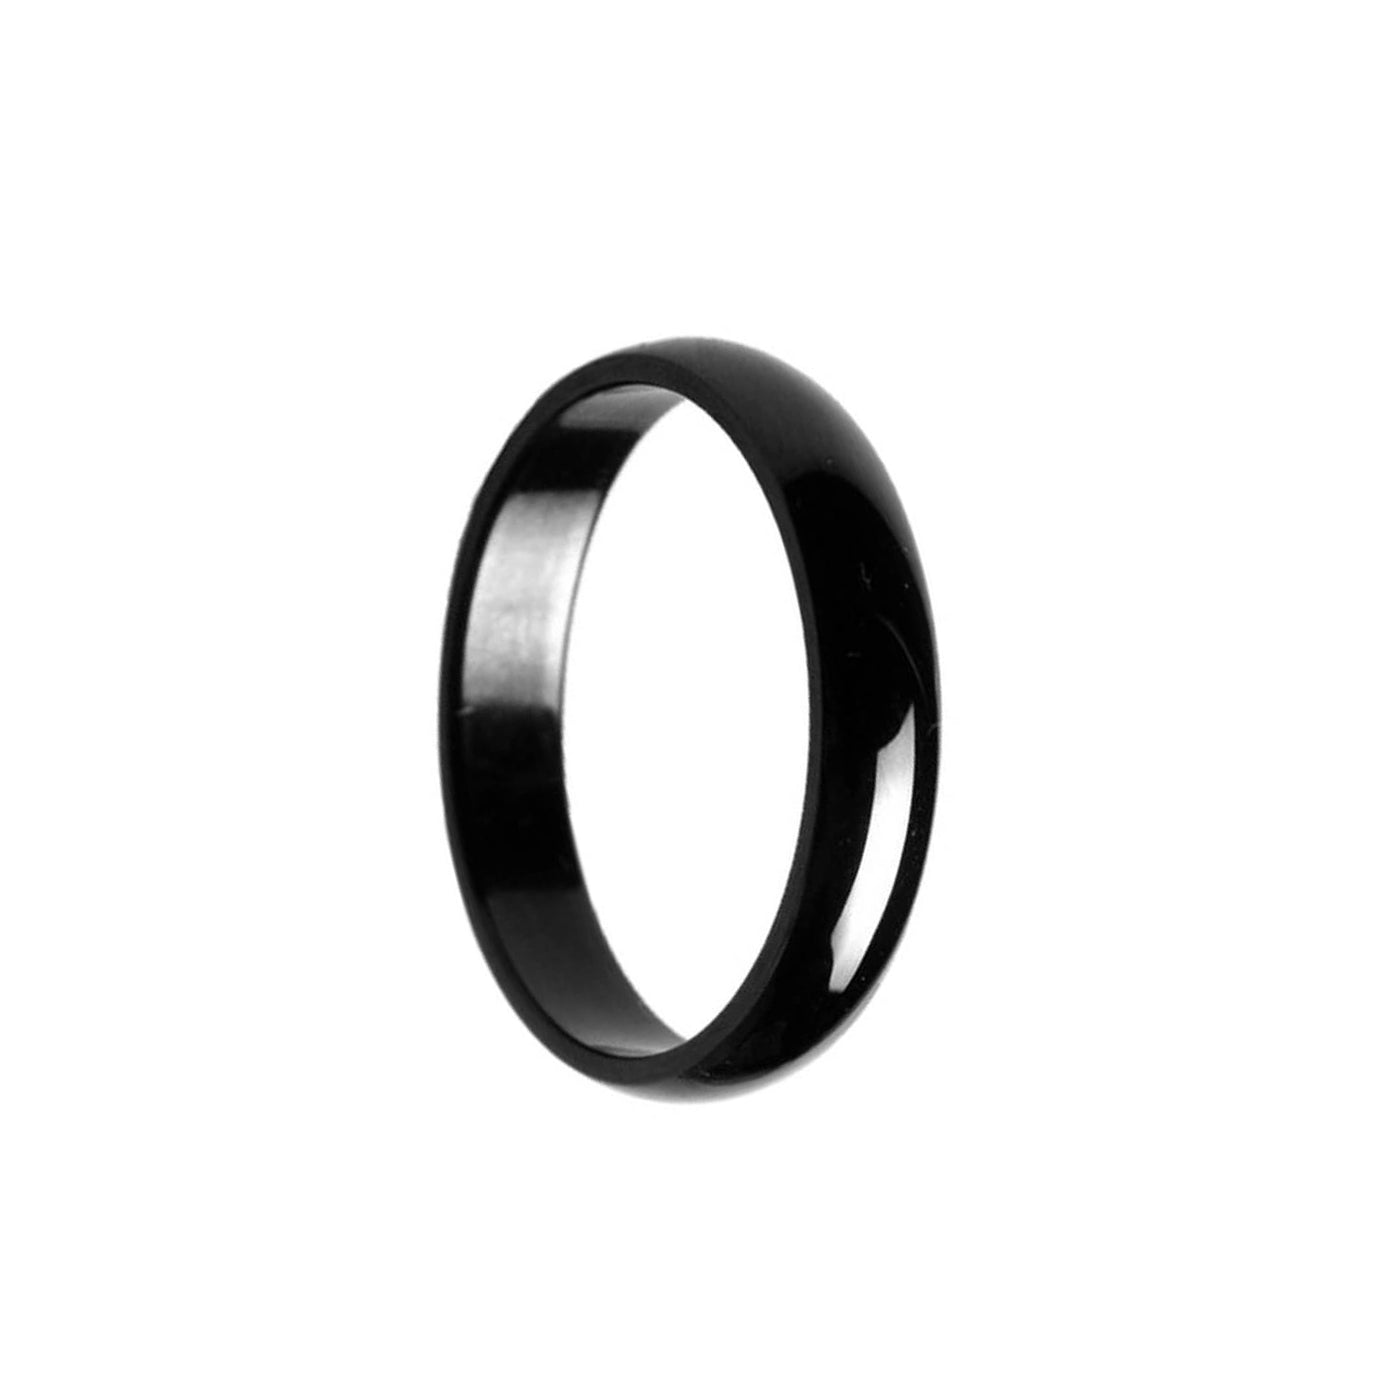 Black curved steel ring 4mm